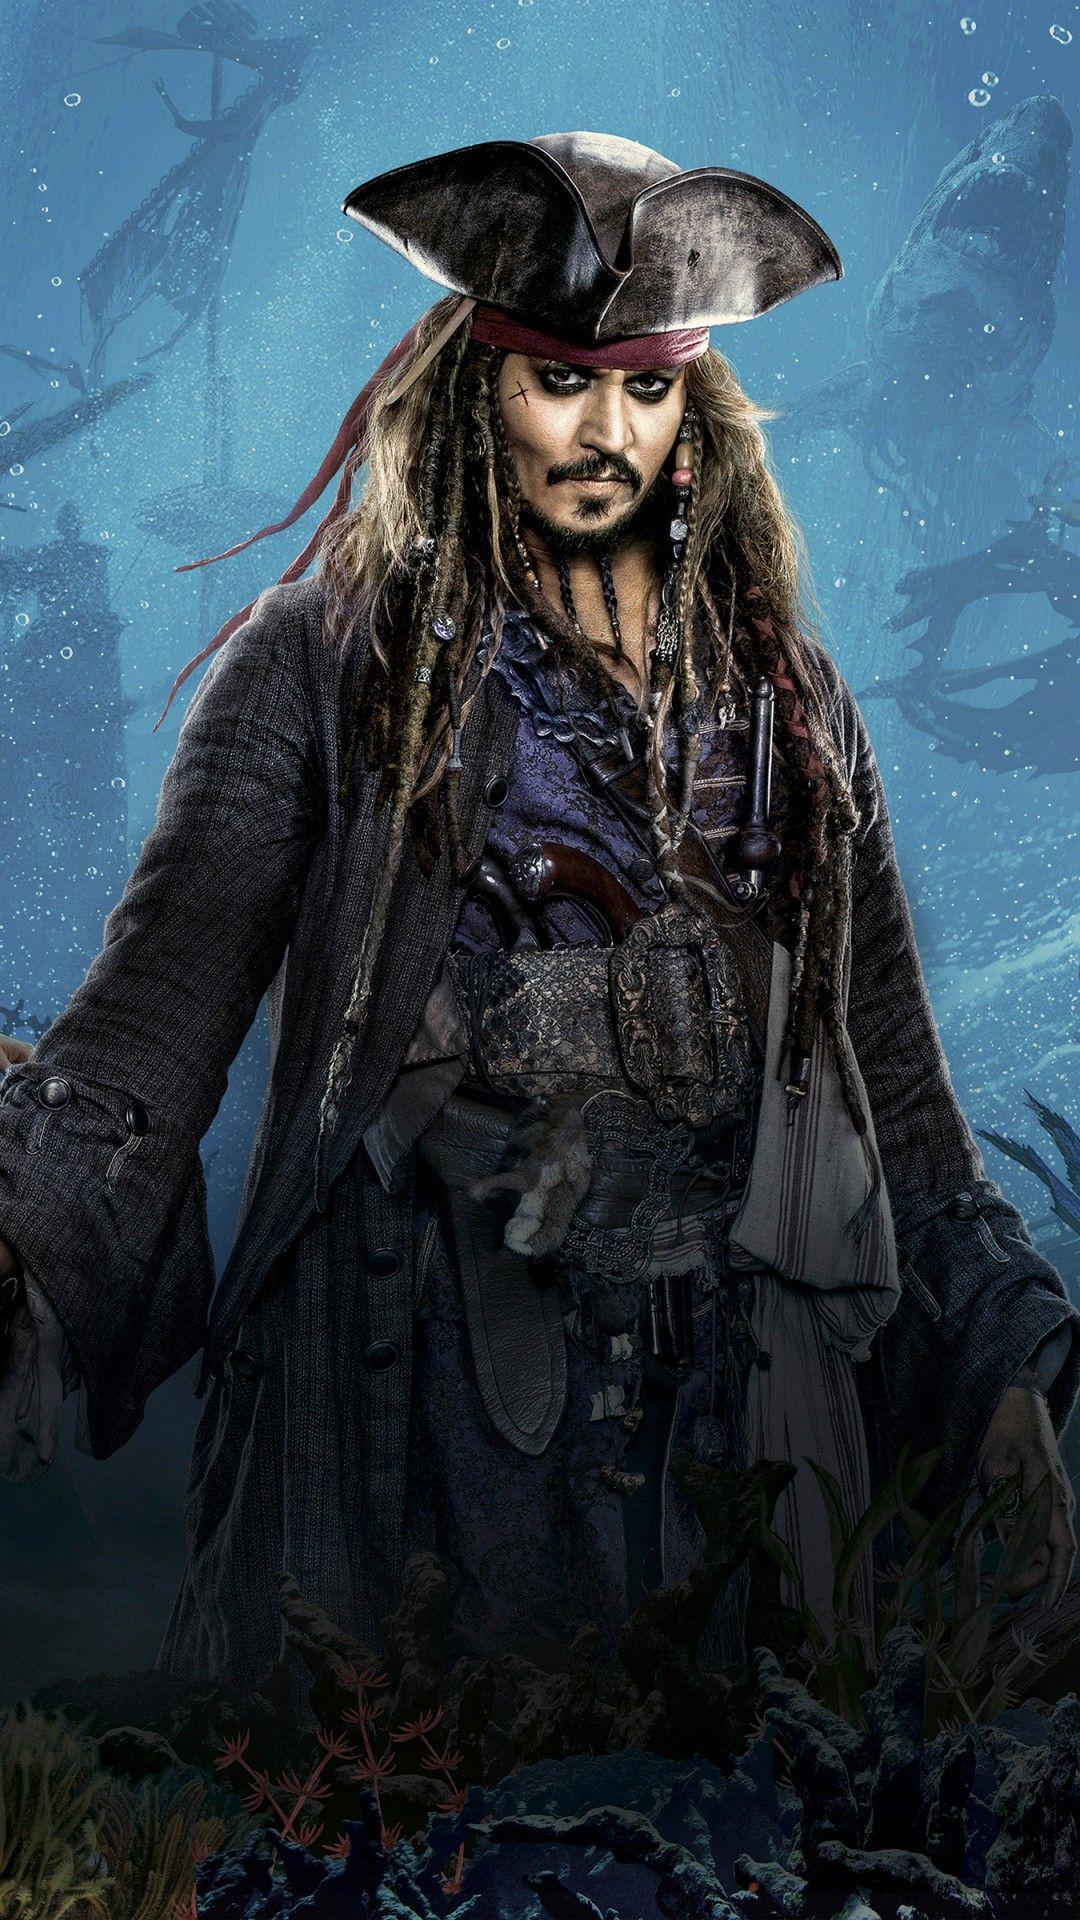 for ios download Pirates of the Caribbean